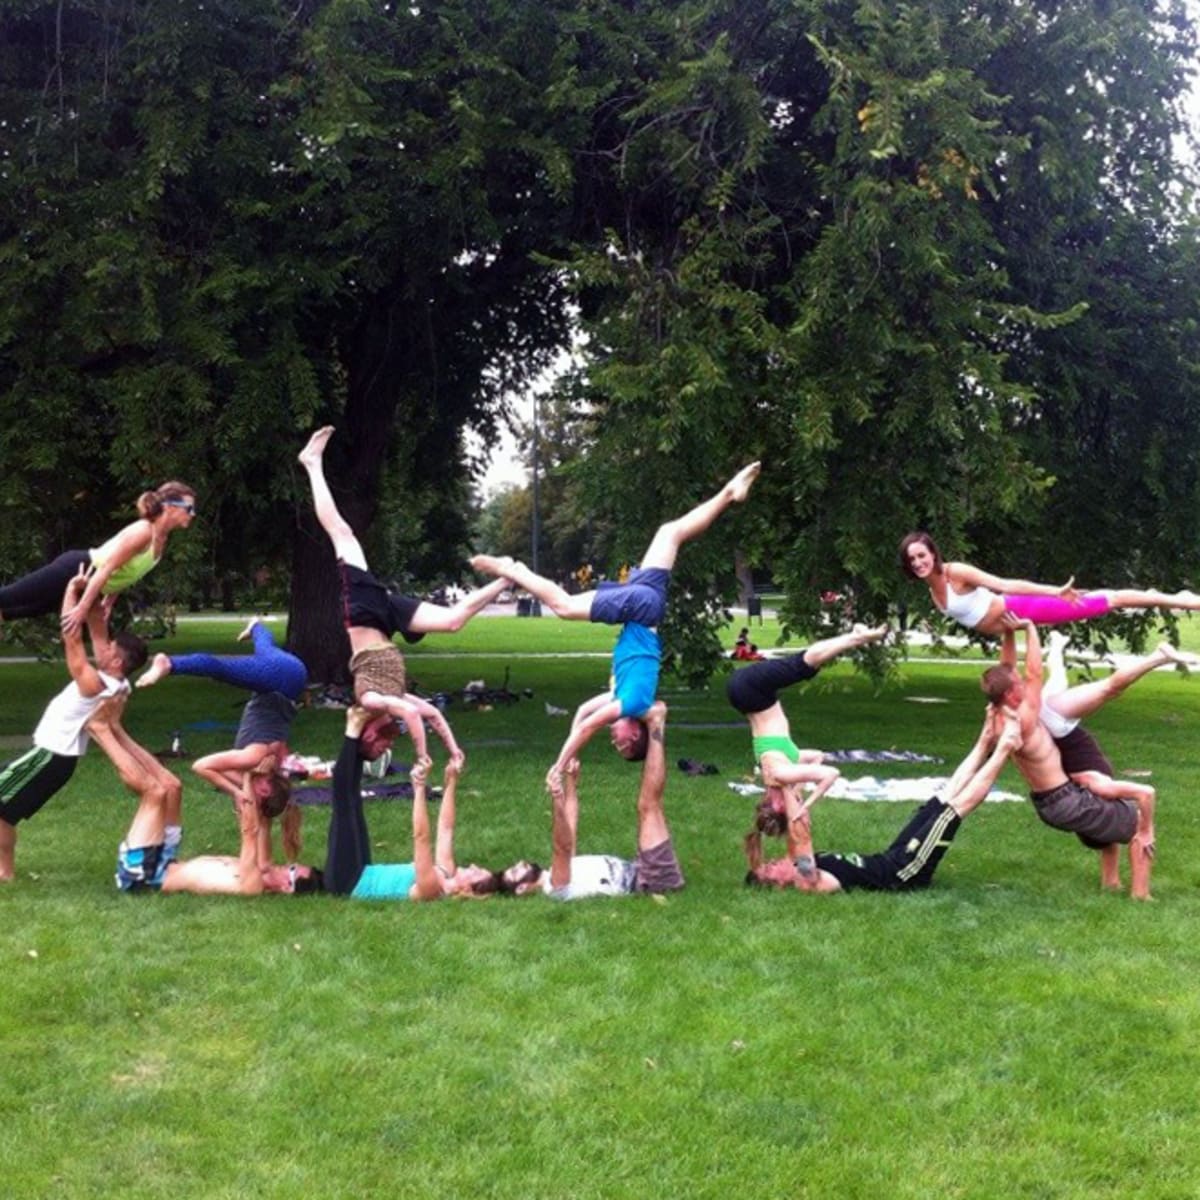 Free clipart similar to A group of women doing yoga in a tree pose -  22965917 | illustAC